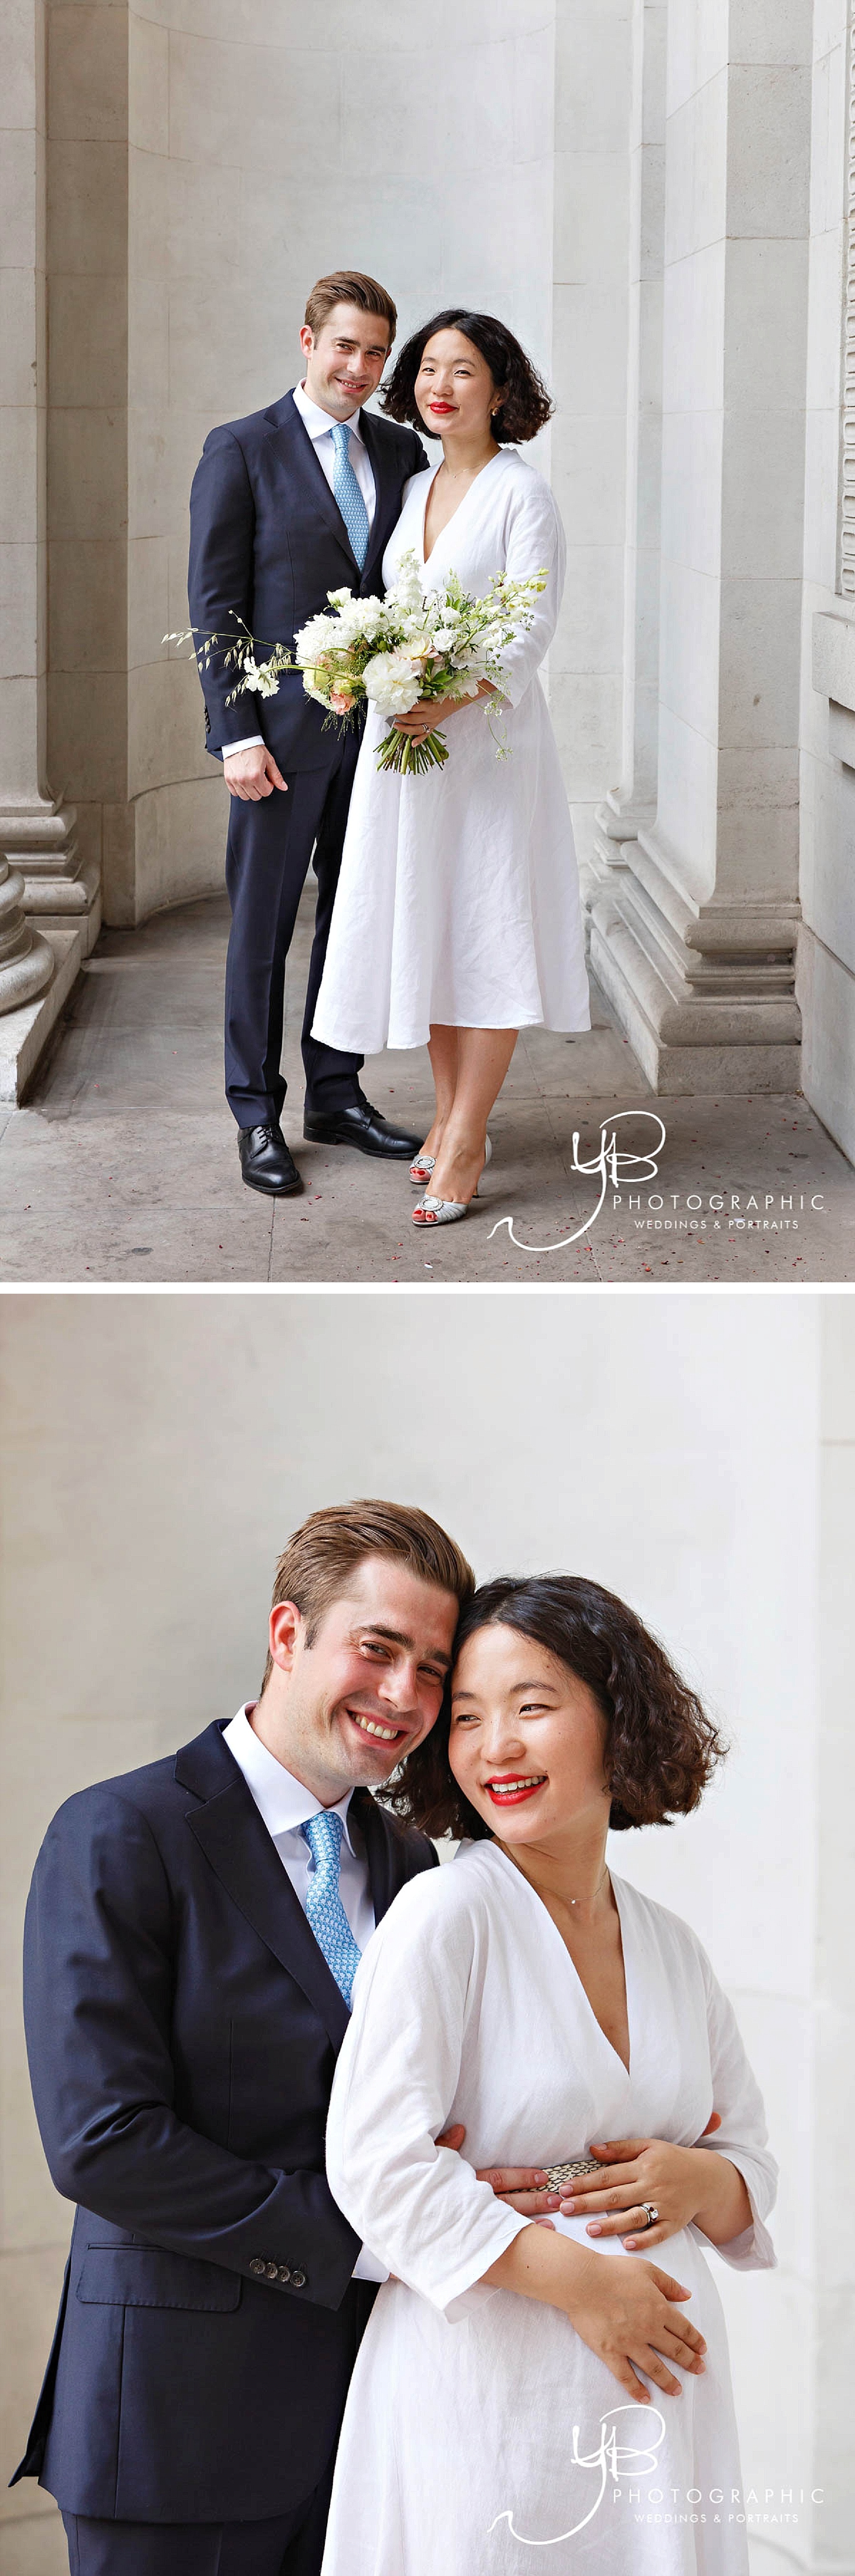 Bride and Groom Portraits at the Old Marylebone Town Hall